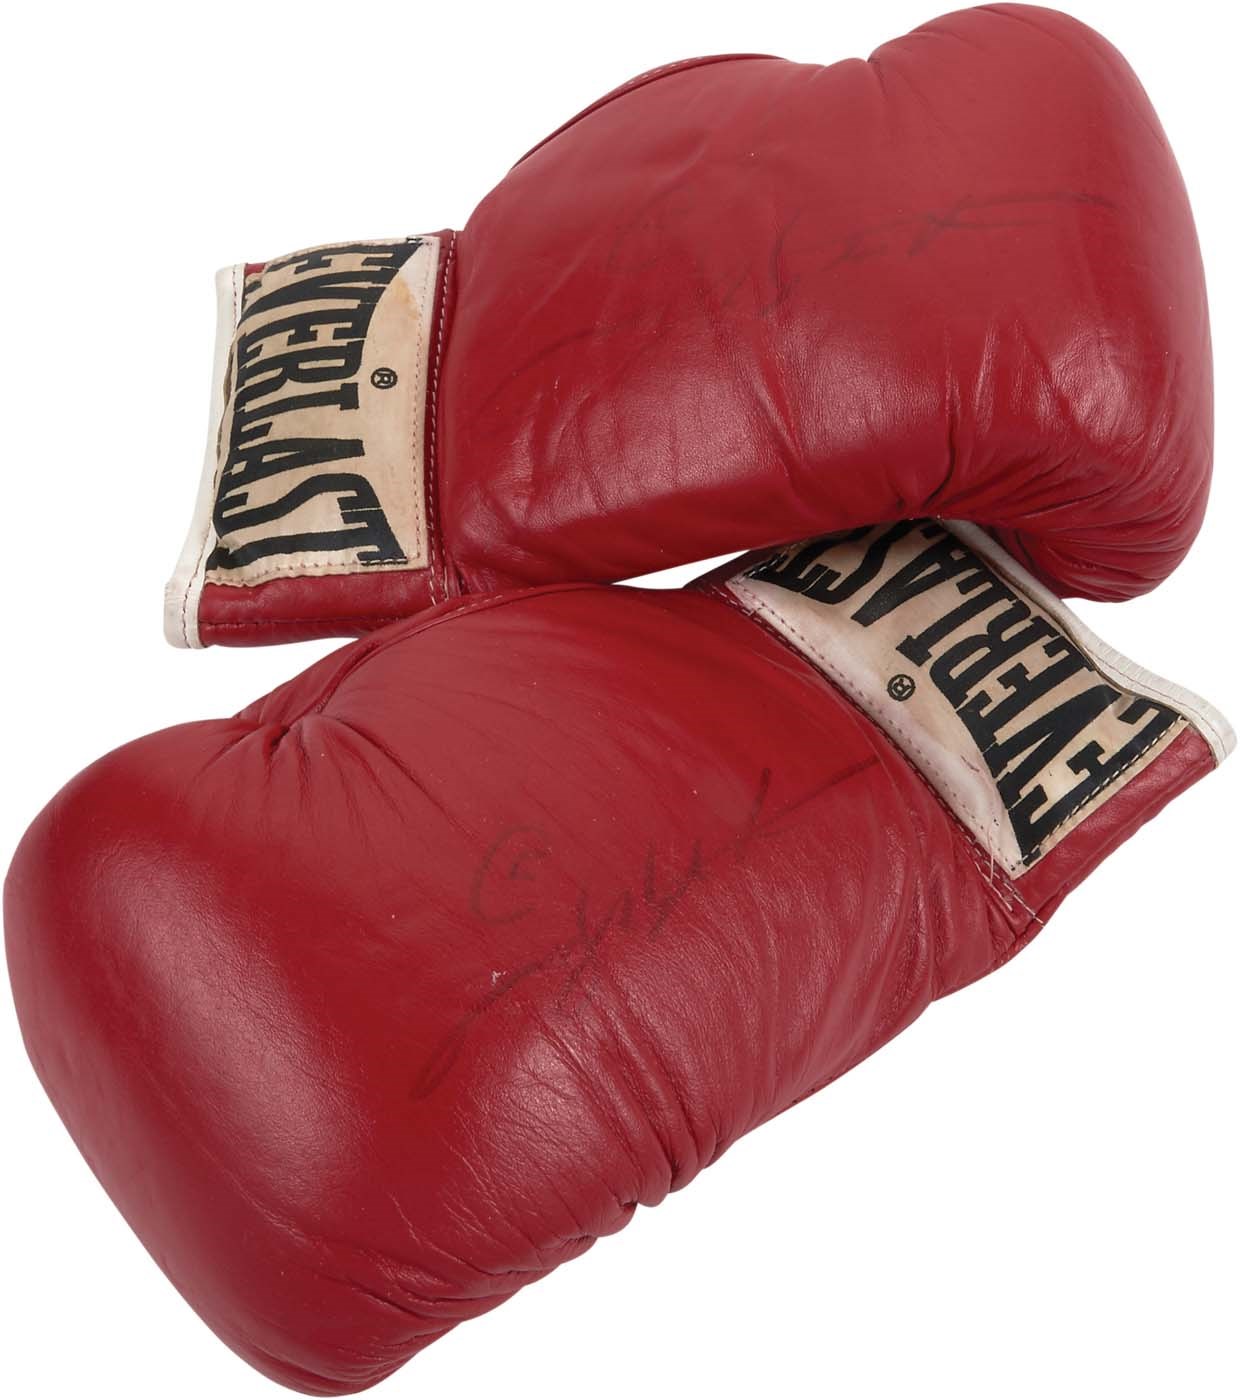 Muhammad Ali & Boxing - 1977 Sugar Ray Leonard Pro Debut Signed Fight Gloves (Photo-Matched)